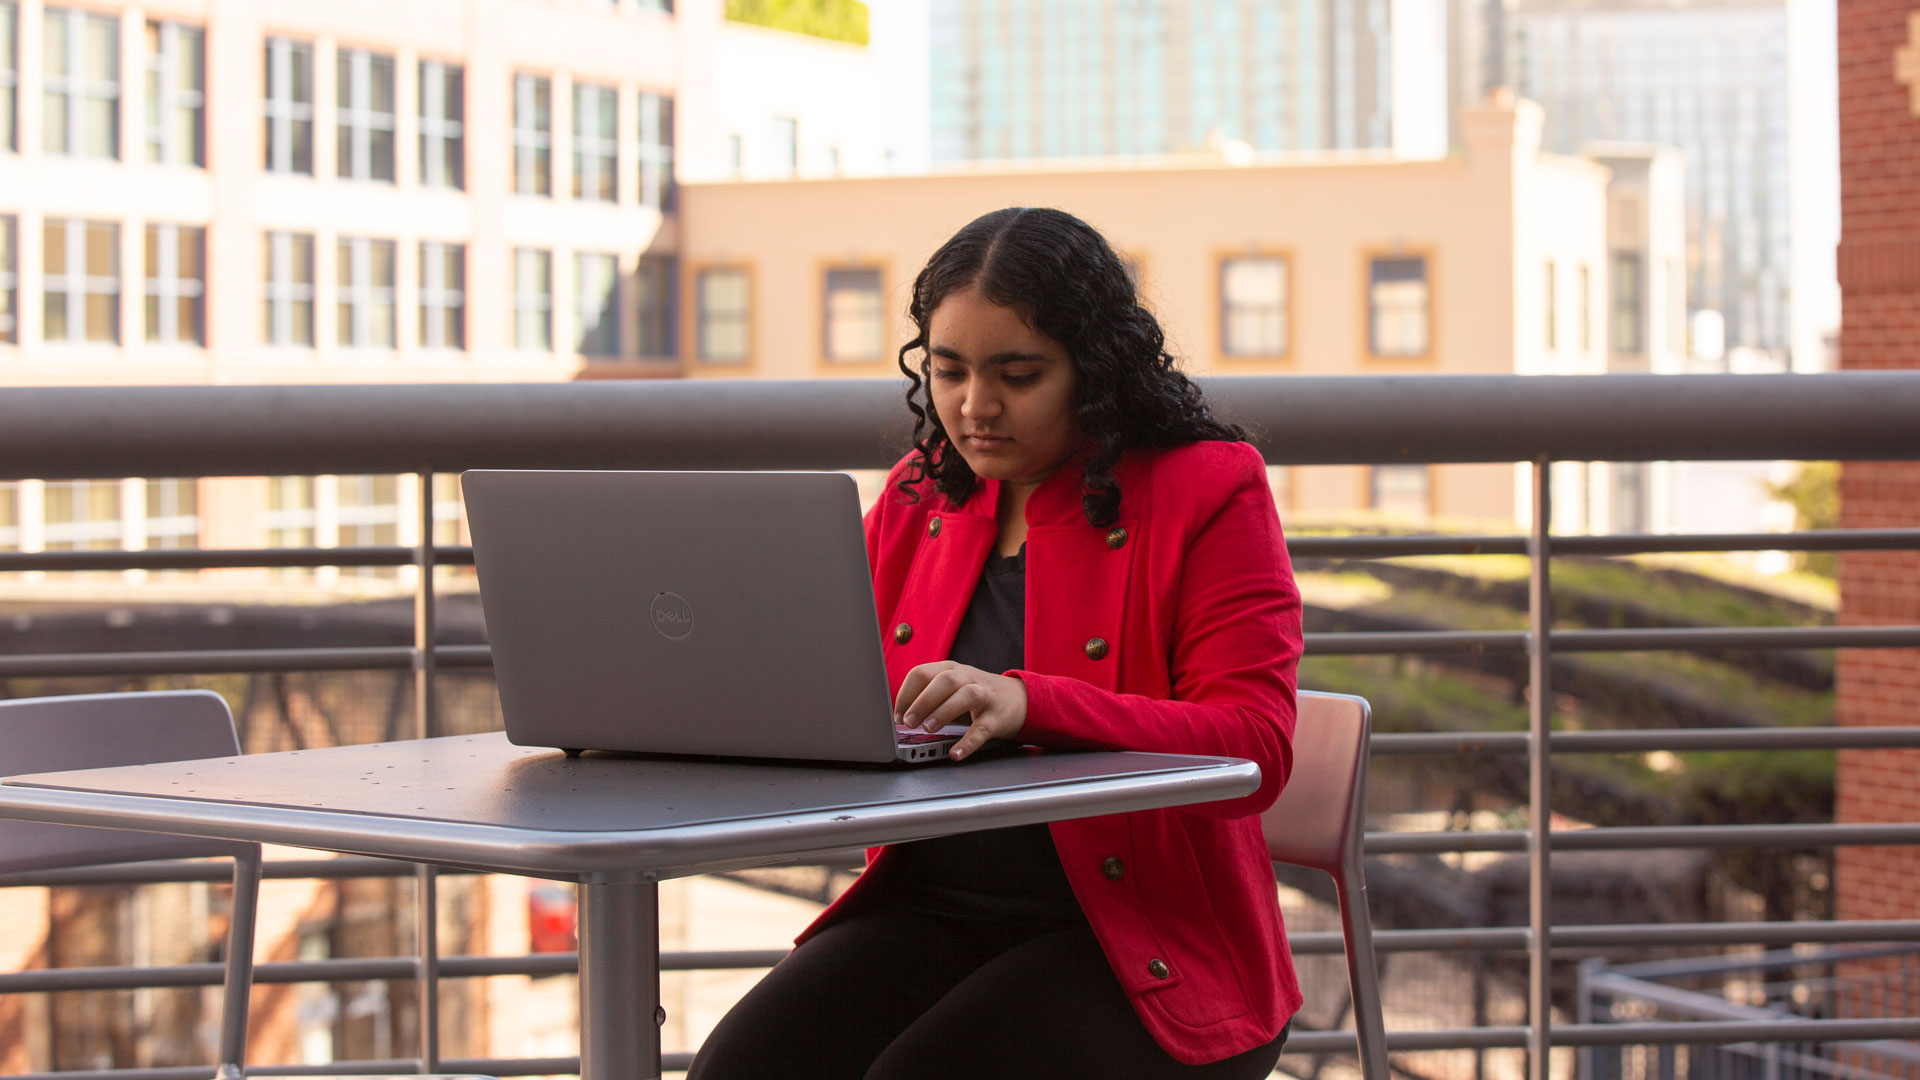 Computer systems engineering student Tina Sindwani works on a laptop.